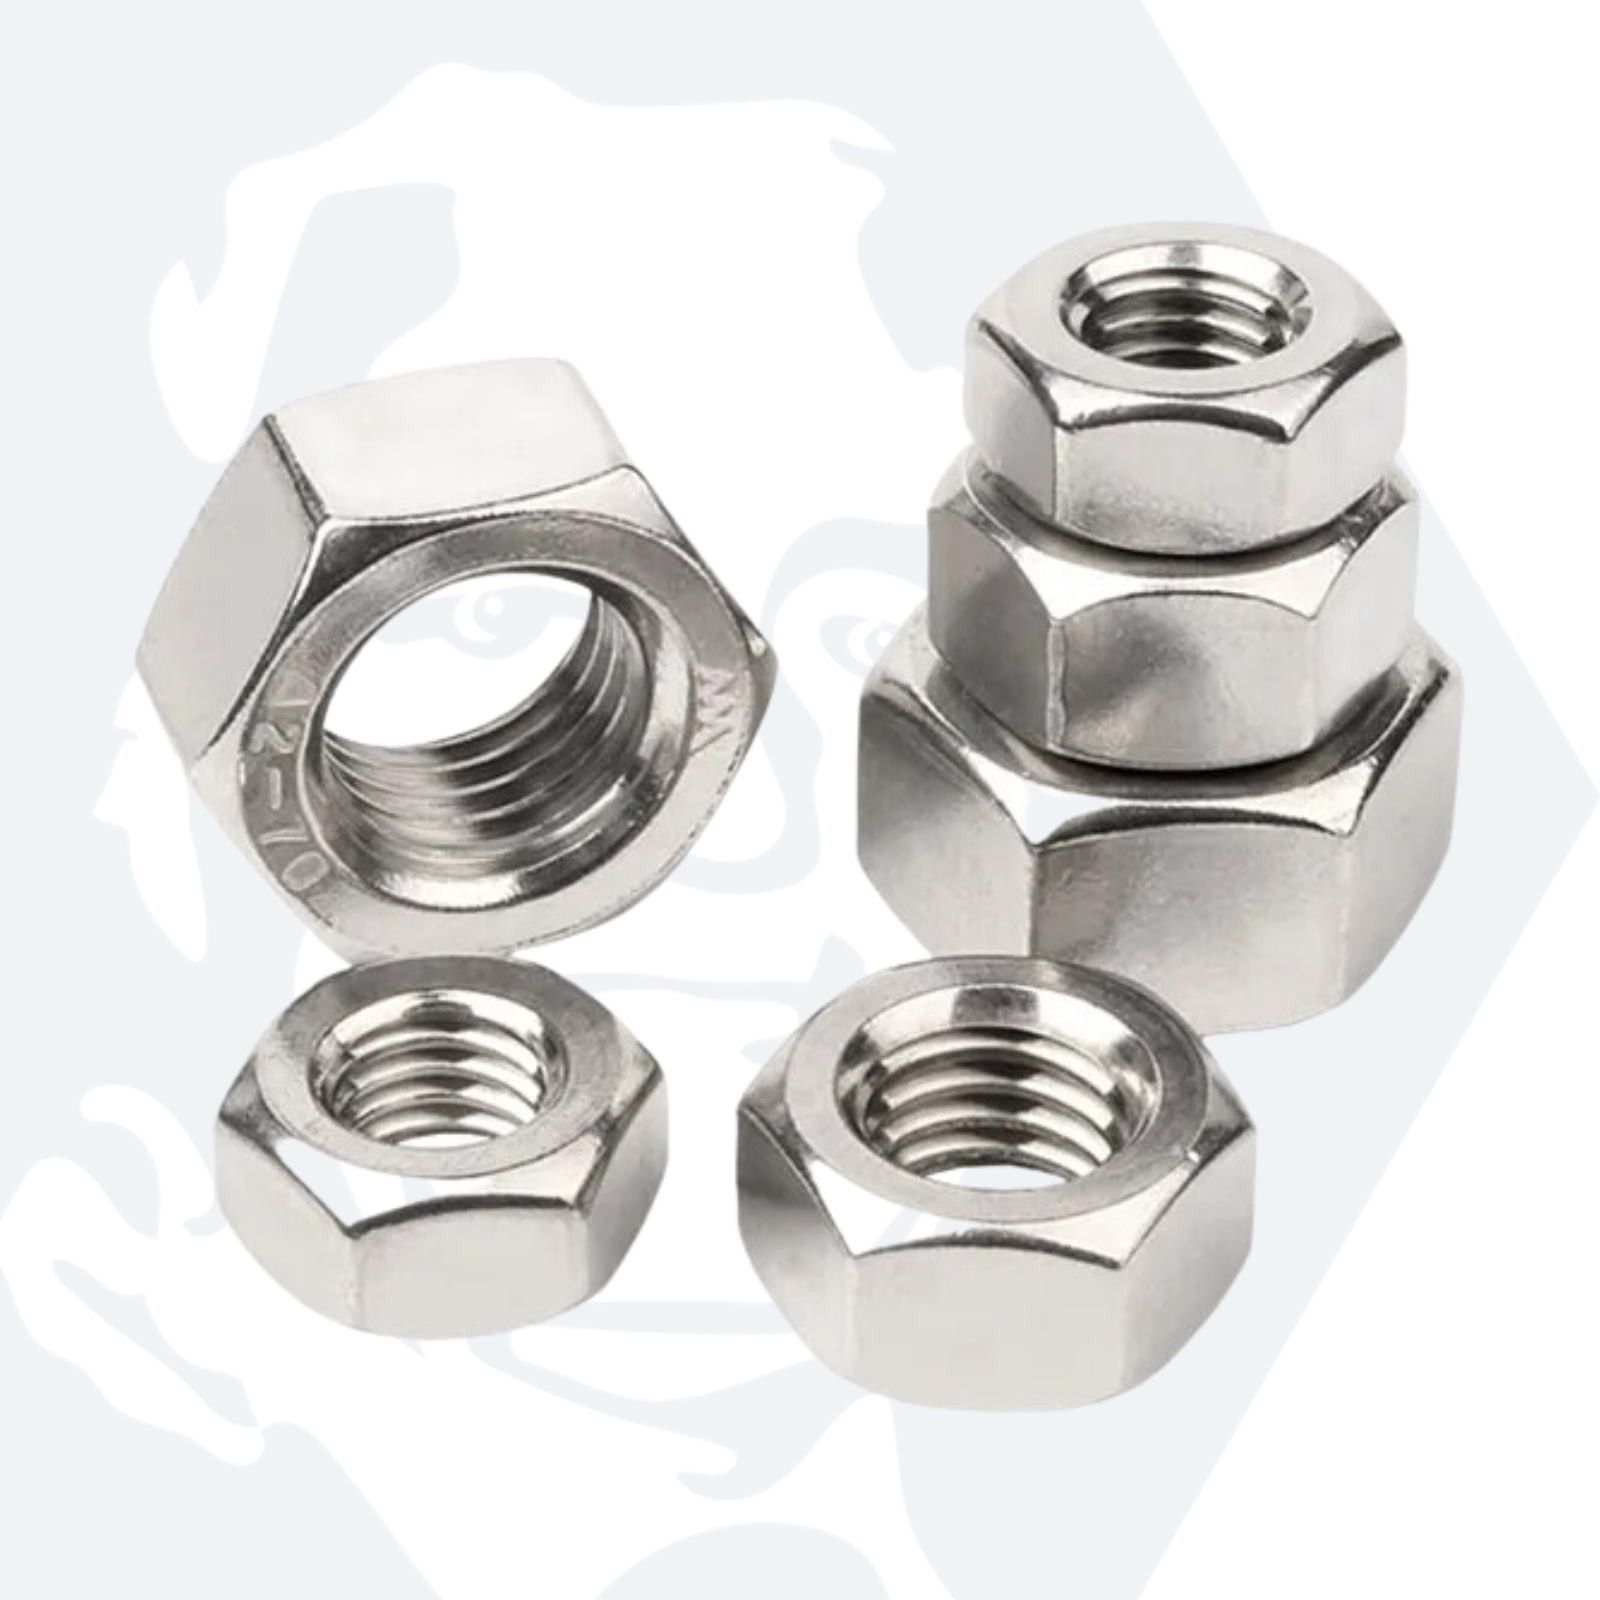 M2 Hexagon Nuts (DIN 934) - Stainless Steel (A2)